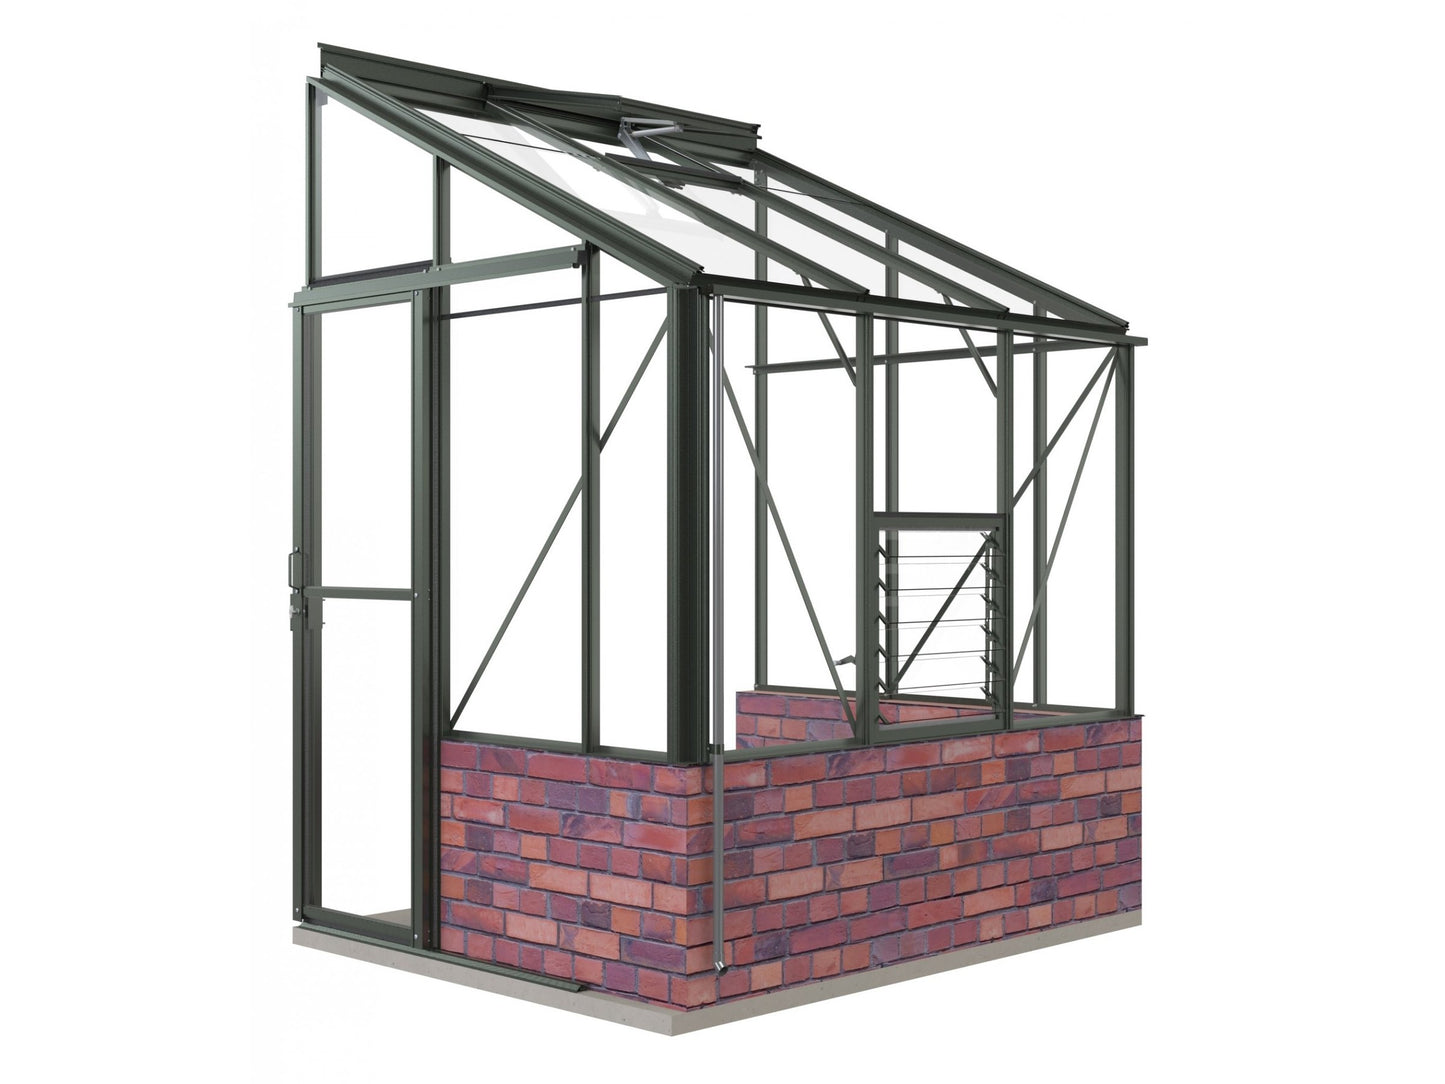 Robinsons 5ft wide LEAN-TO Dwarf Wall